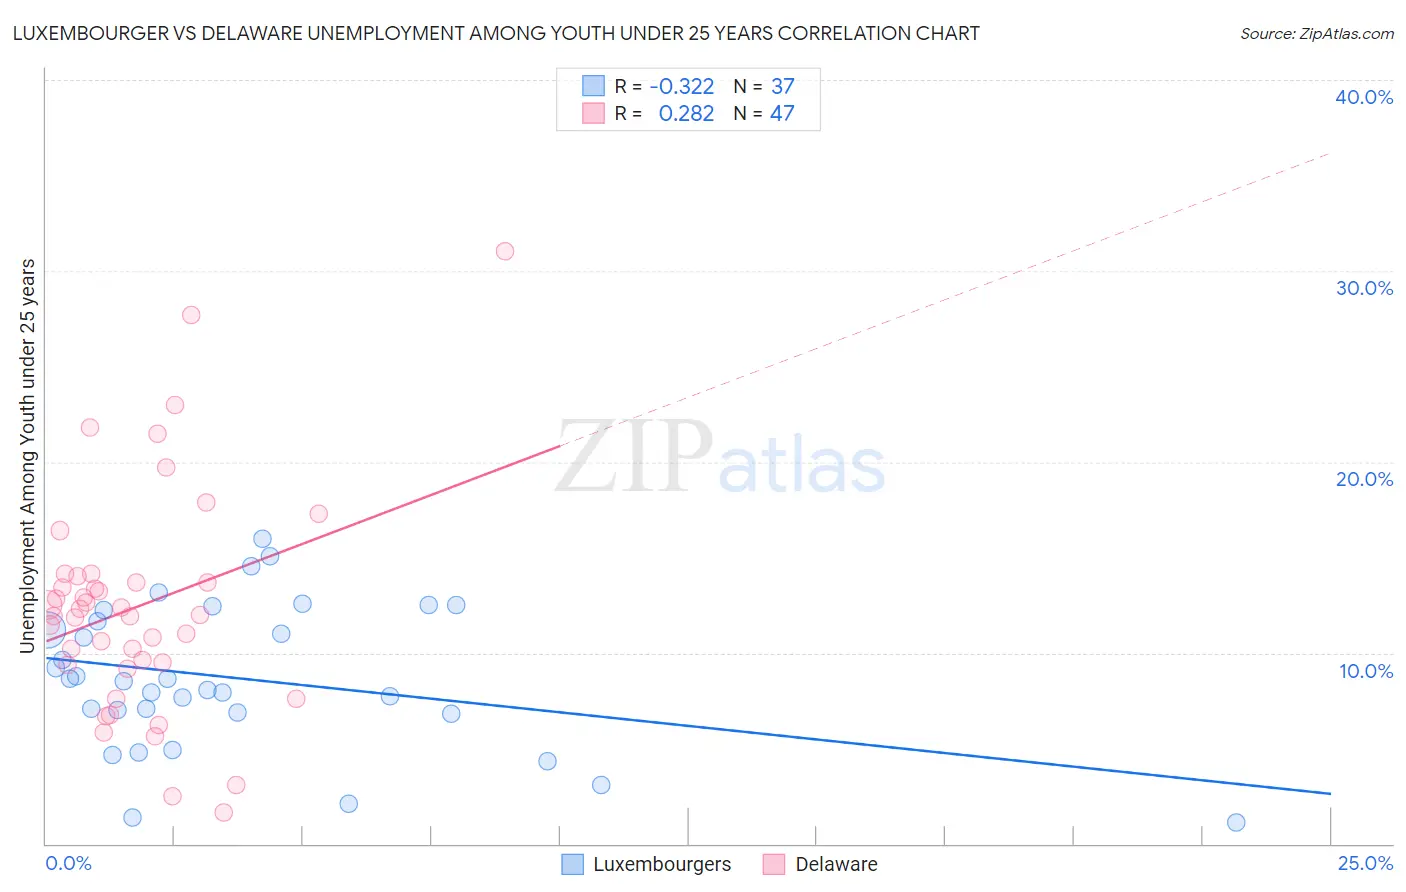 Luxembourger vs Delaware Unemployment Among Youth under 25 years